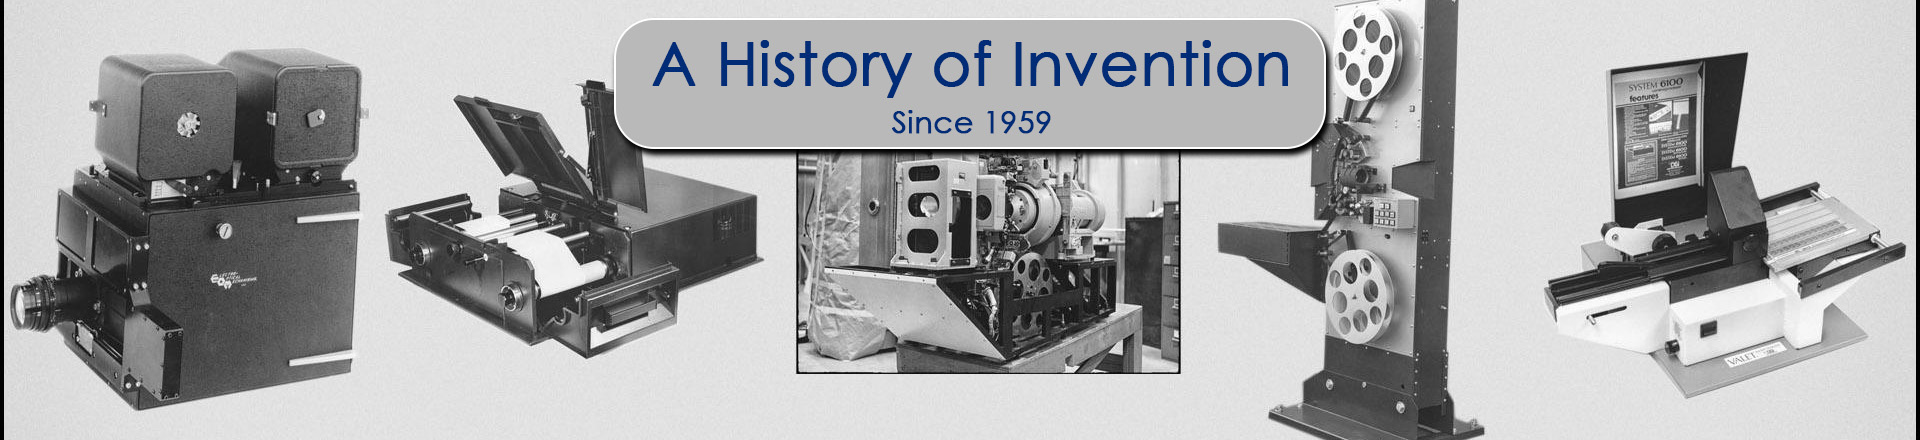 Digital Check history of invention